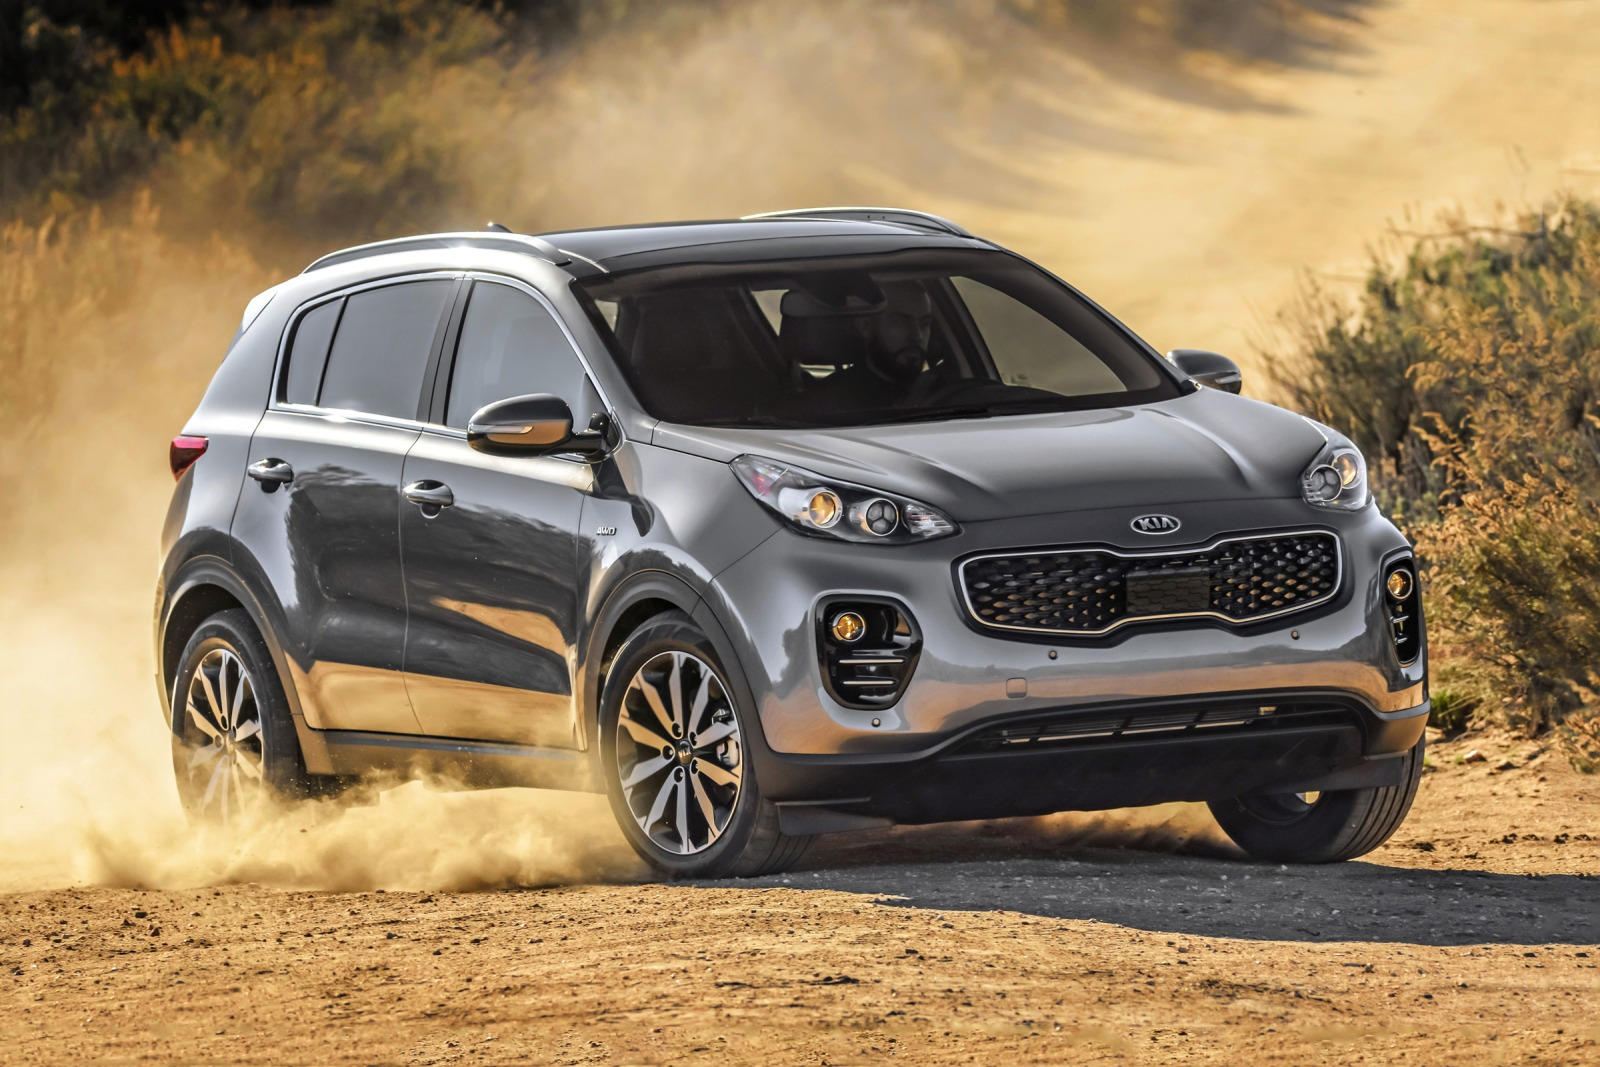 Which Color Options Are Available For The 2018 Kia Sportage?